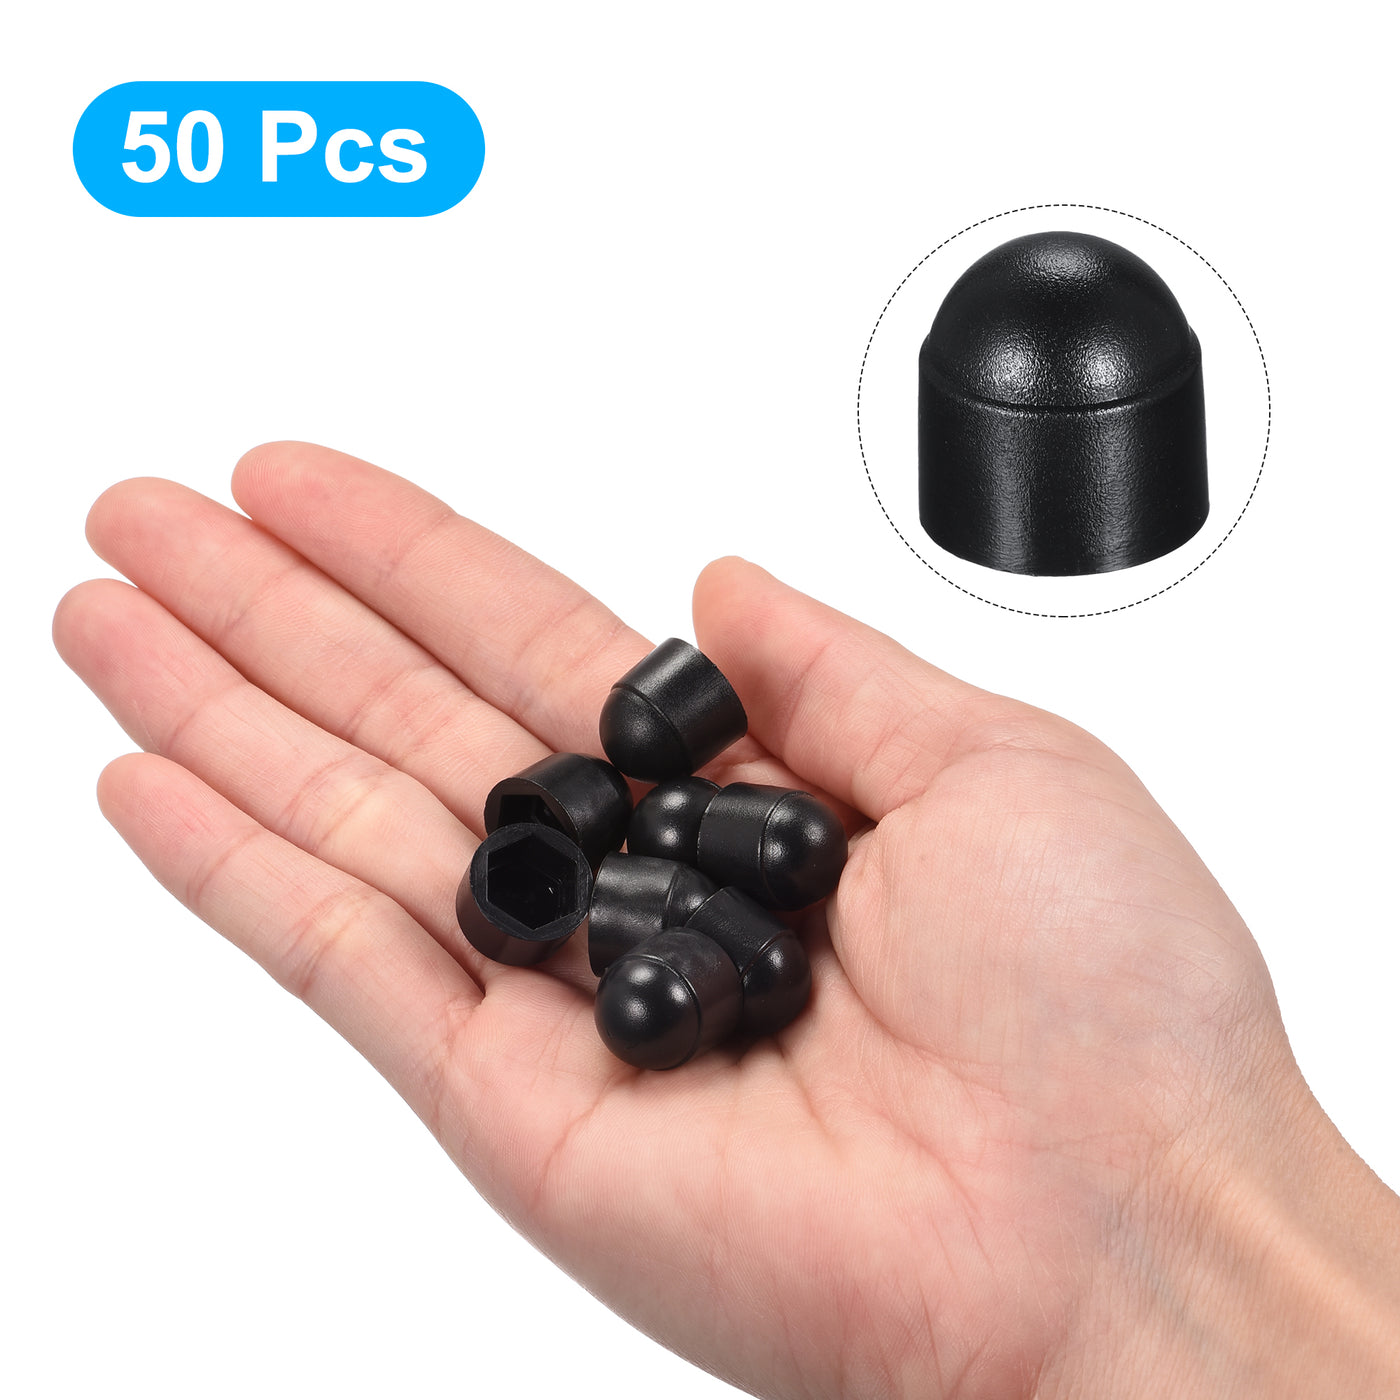 uxcell Uxcell 50pcs Plastic Dome Bolt Nut Protection Cap M6 / 10mm Hex Screw Cover Black